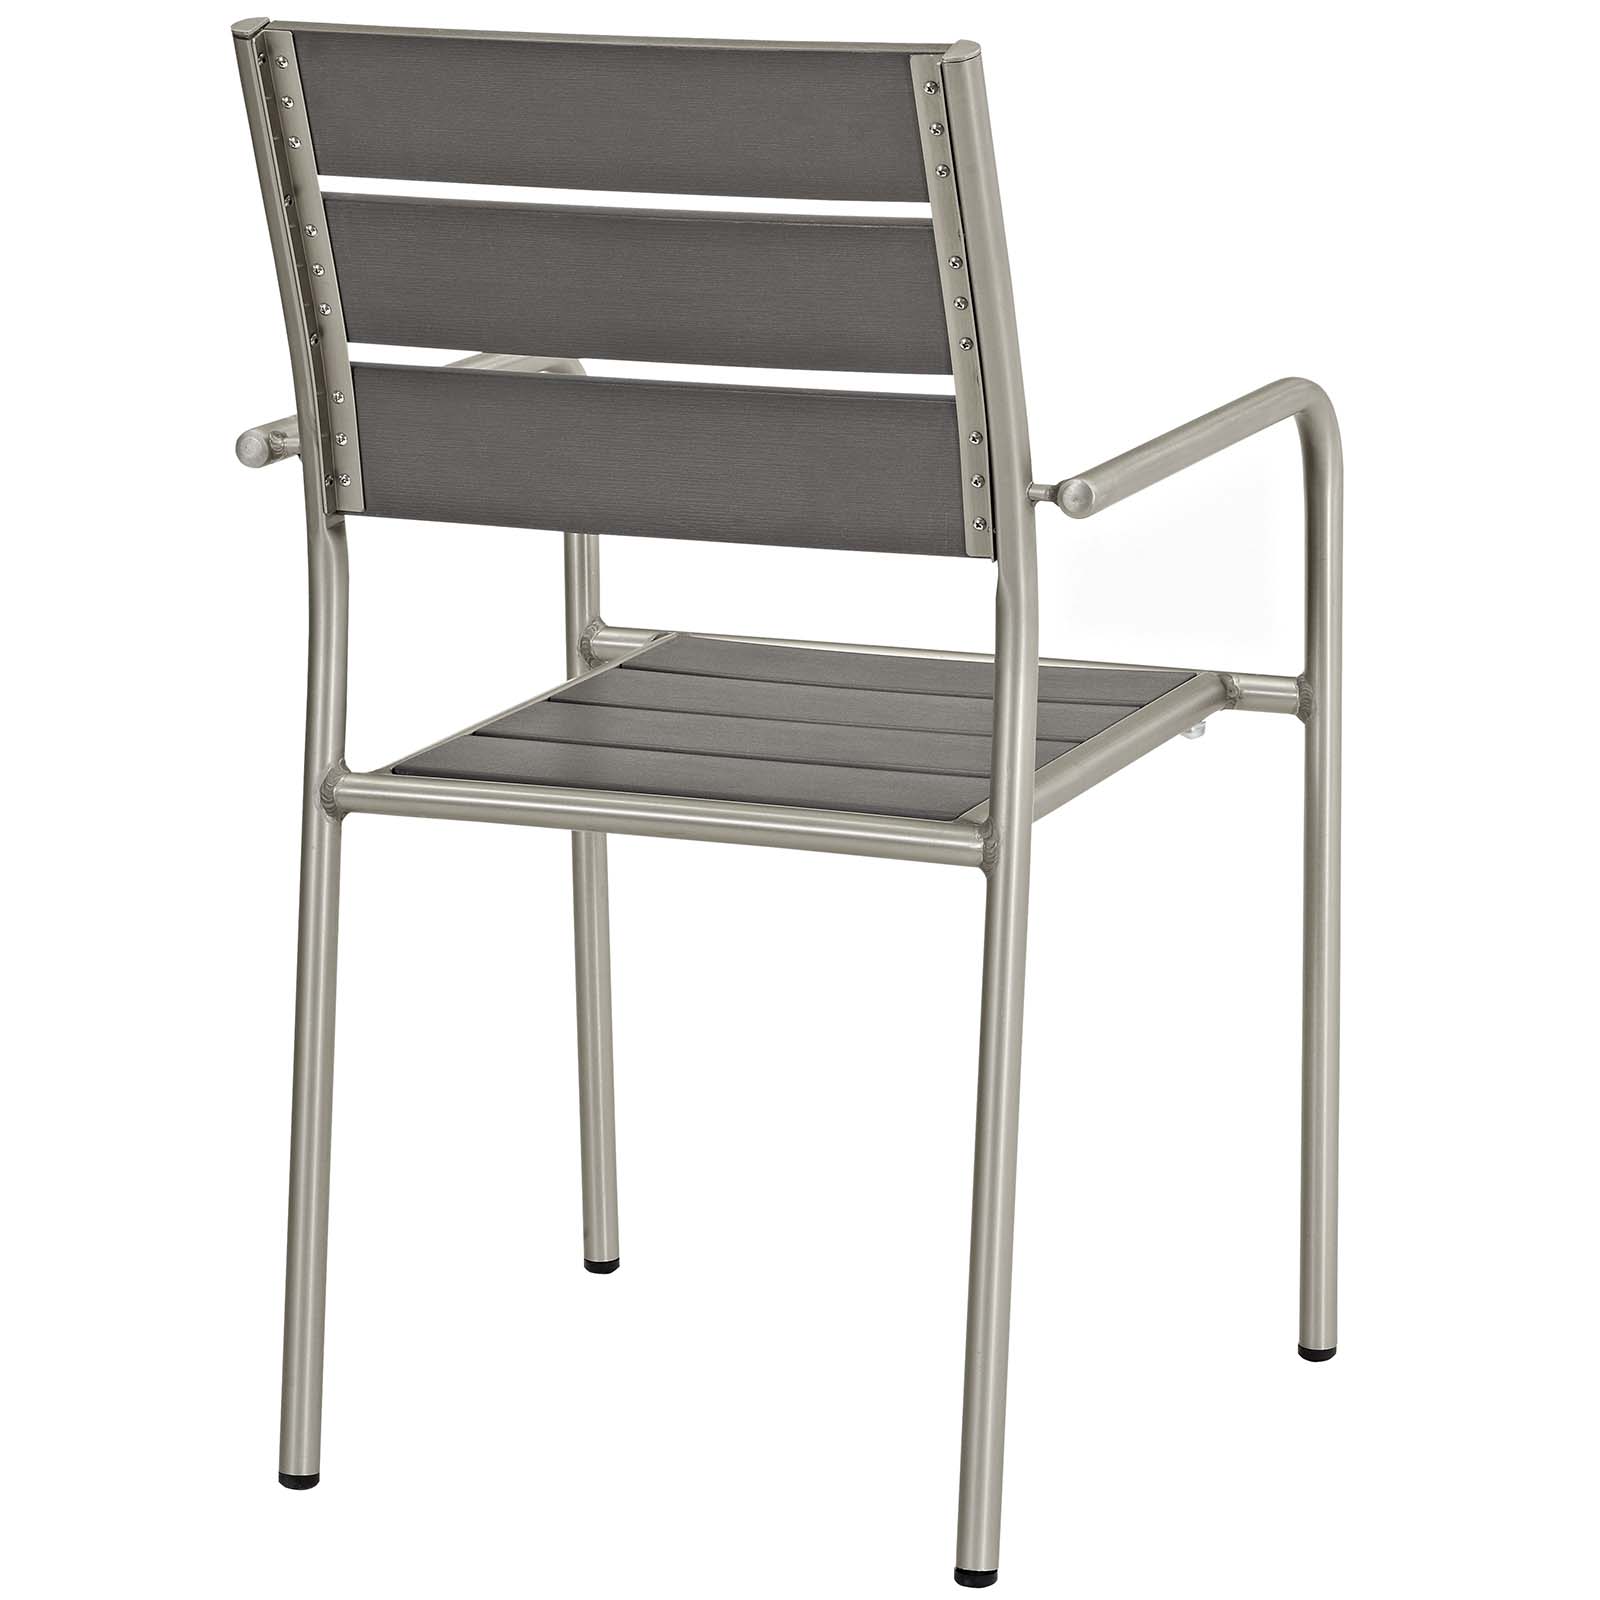 Modern Contemporary Urban Design Outdoor Patio Balcony Garden Furniture Side Dining Chair and Table Set, Aluminum Metal Steel, Grey Gray - image 5 of 9